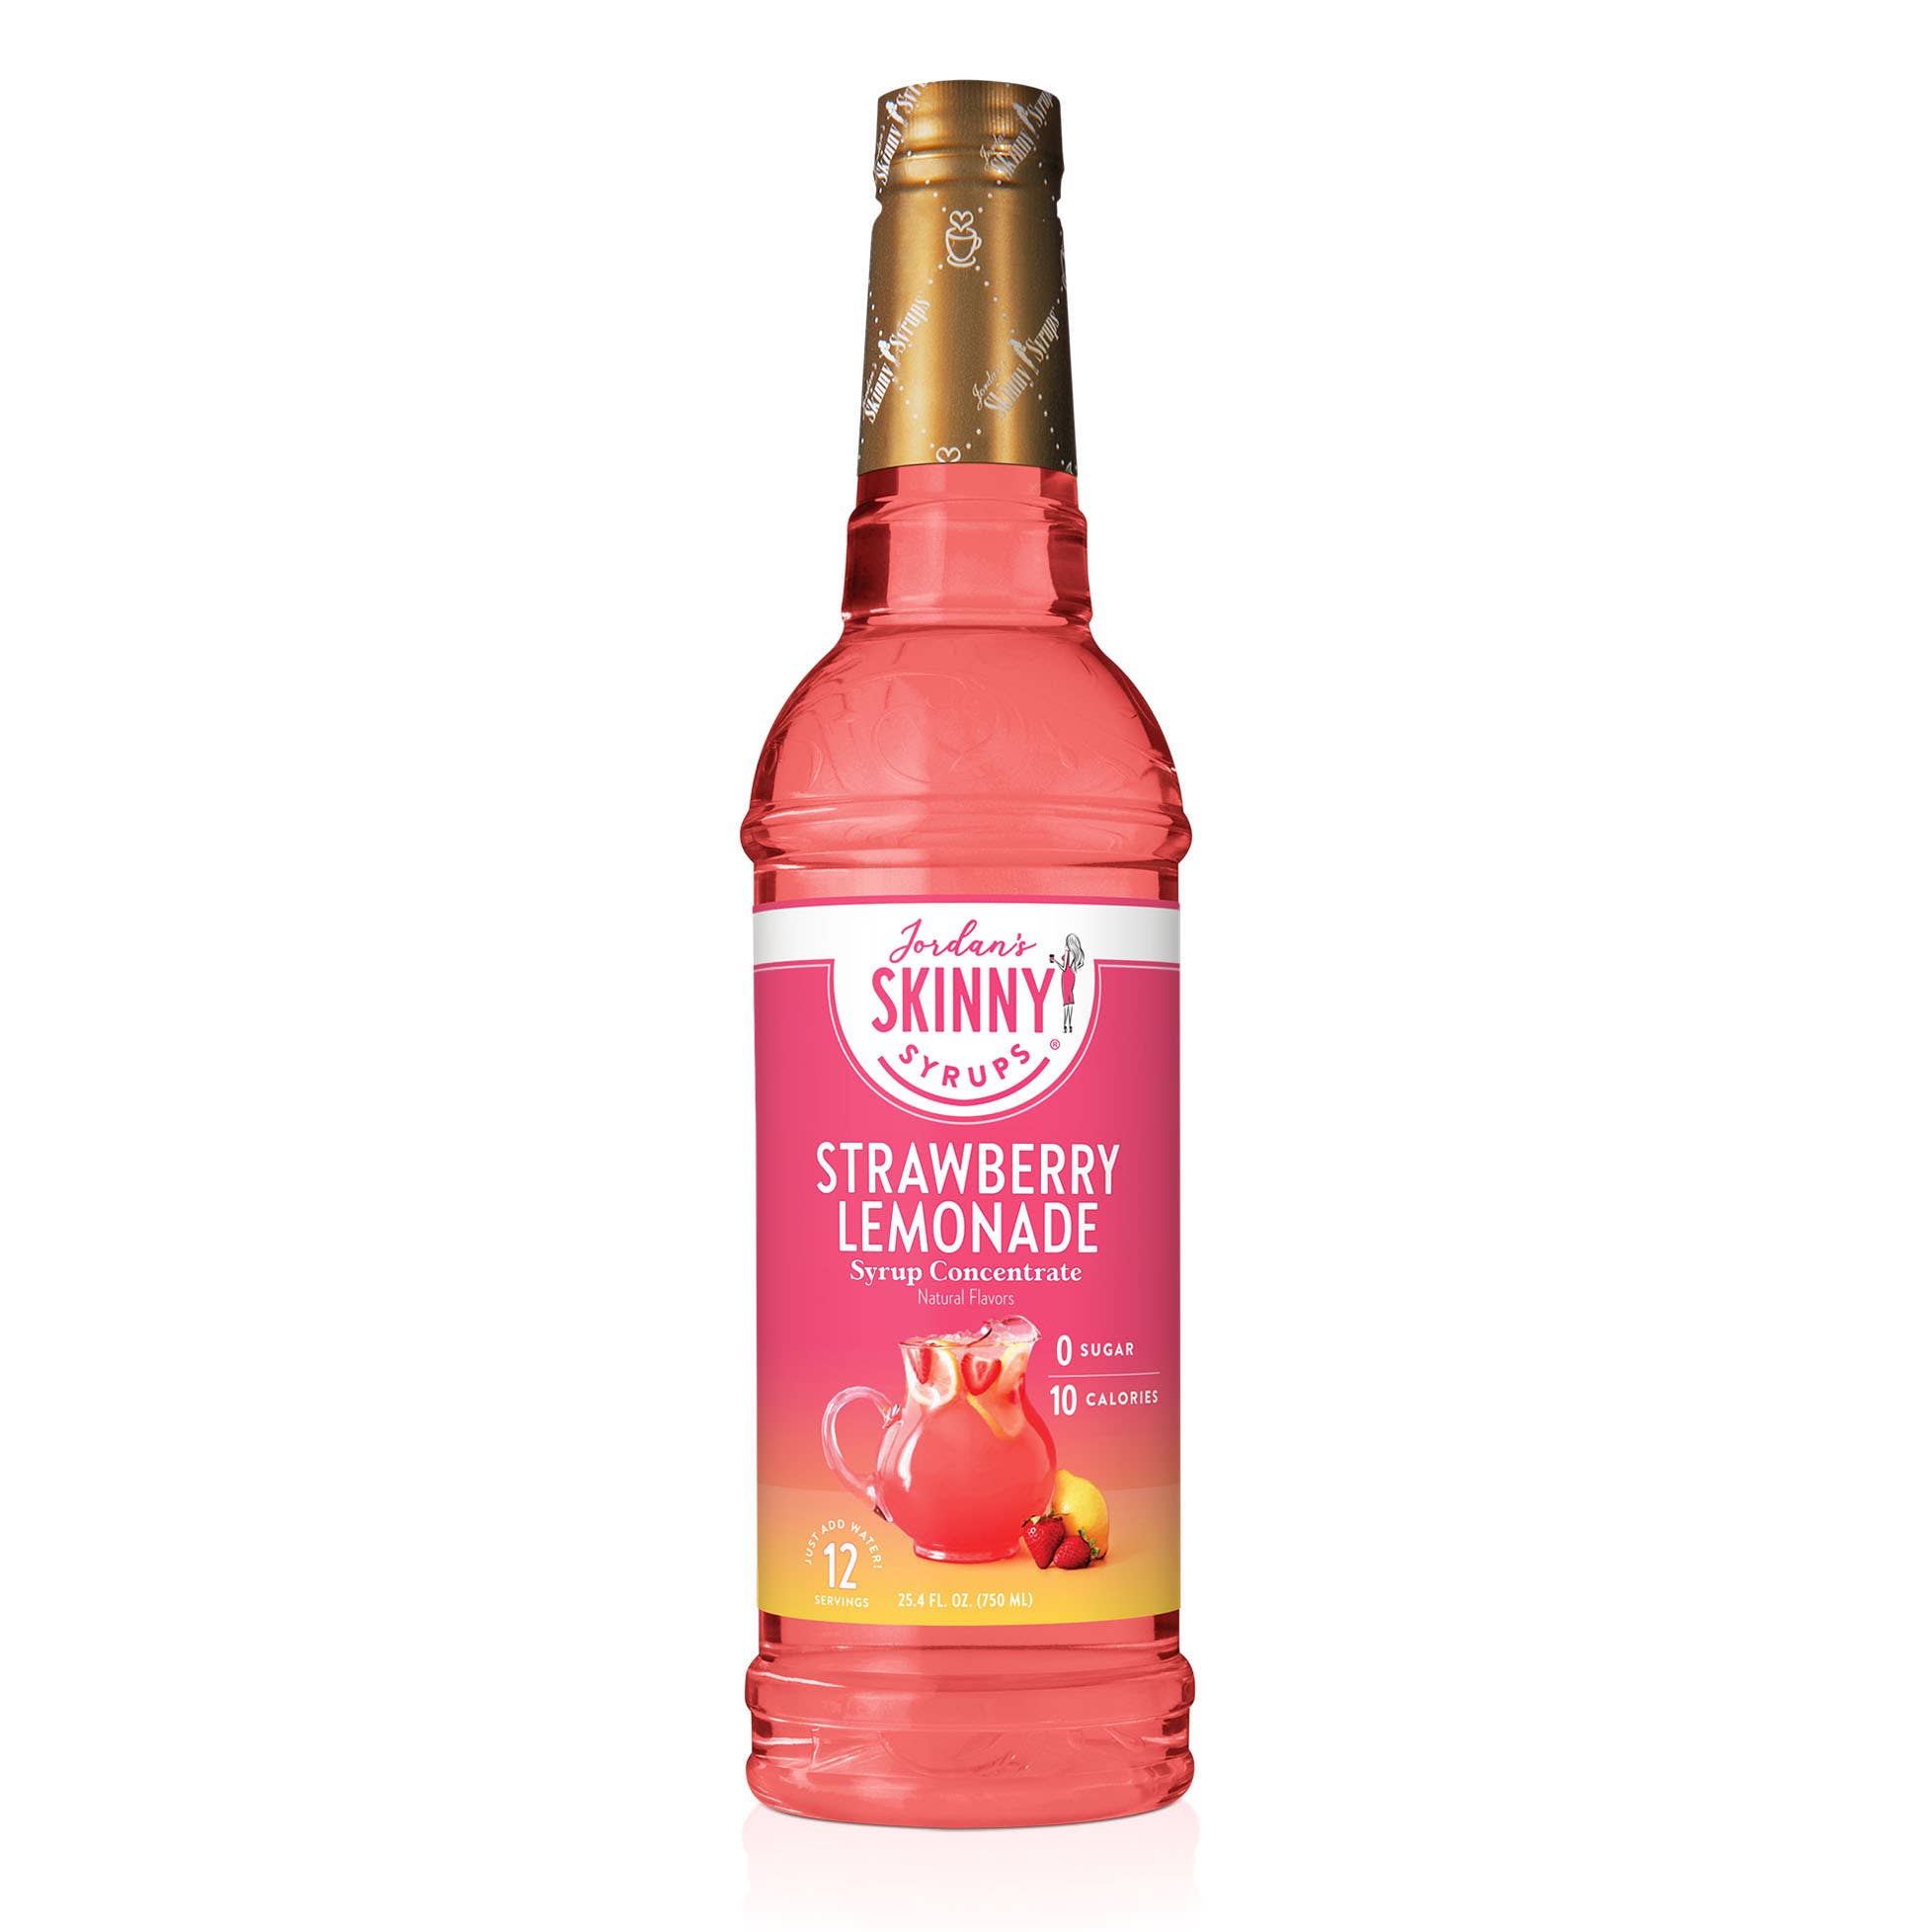 Strawberry Lemonade Syrup Concentrate